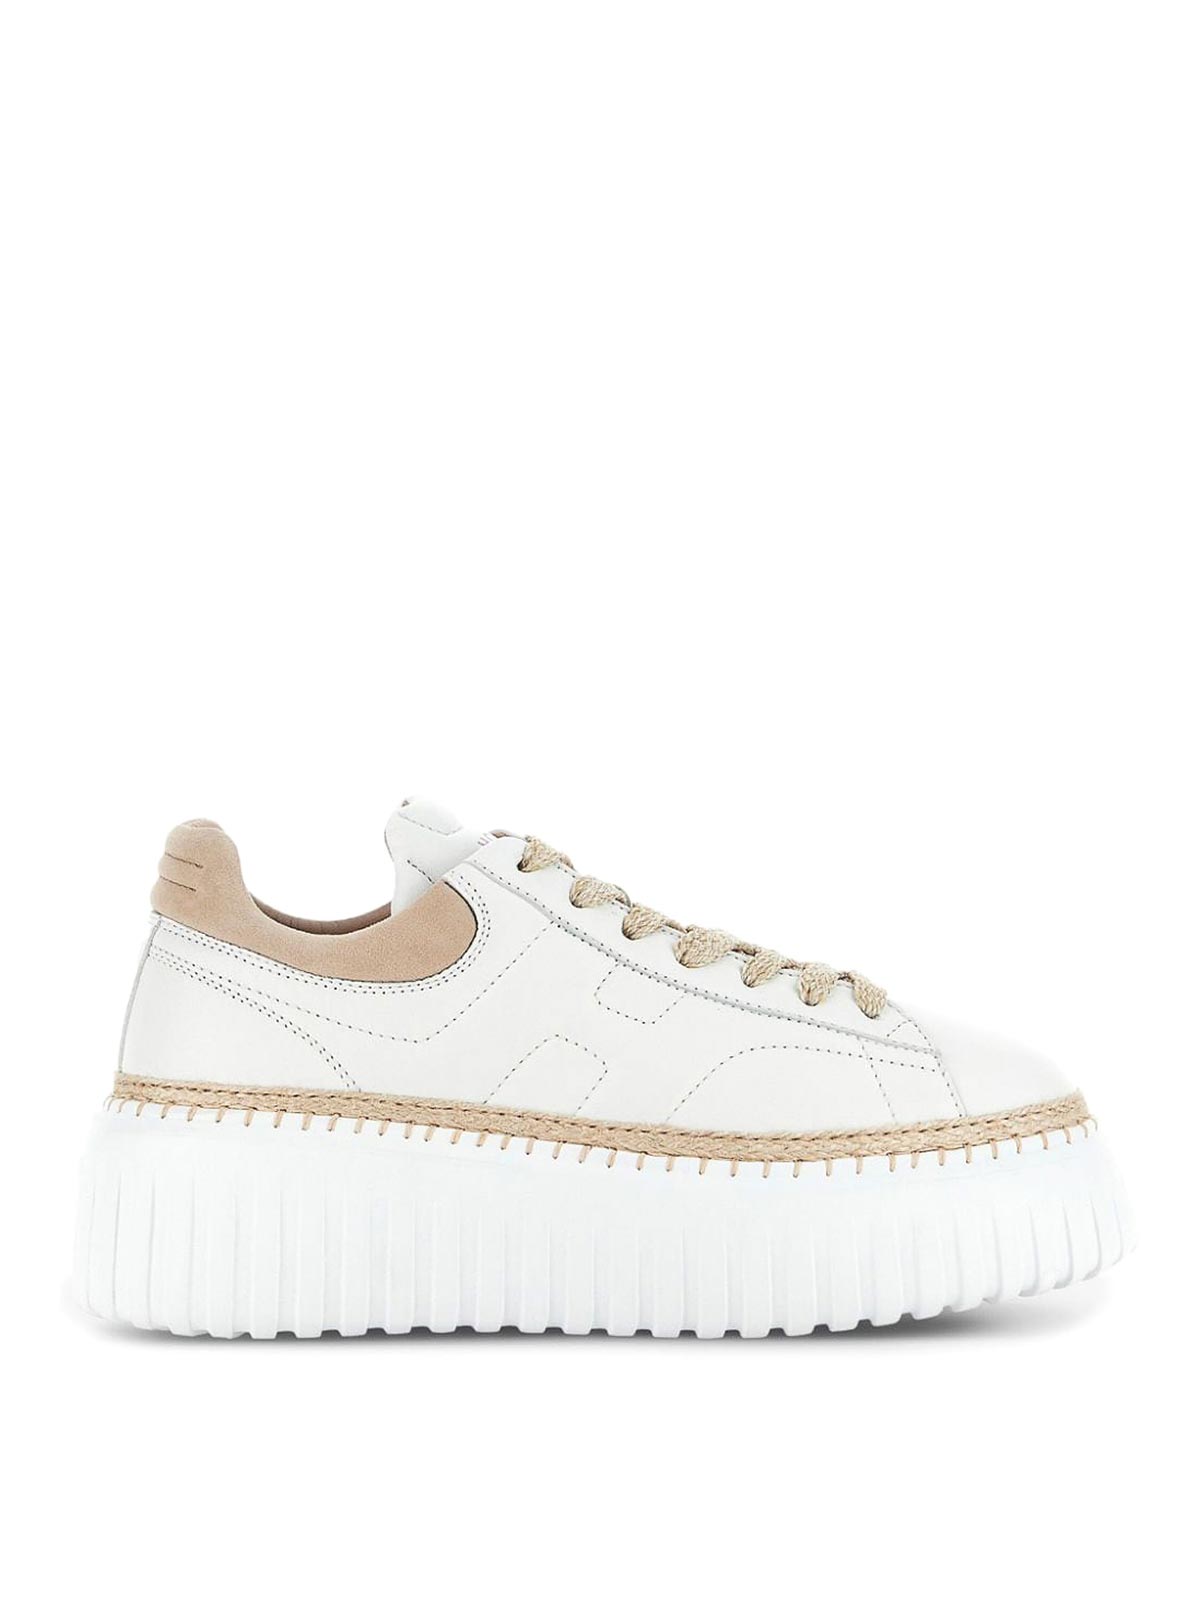 Hogan H-stripes Leather Trainers In White